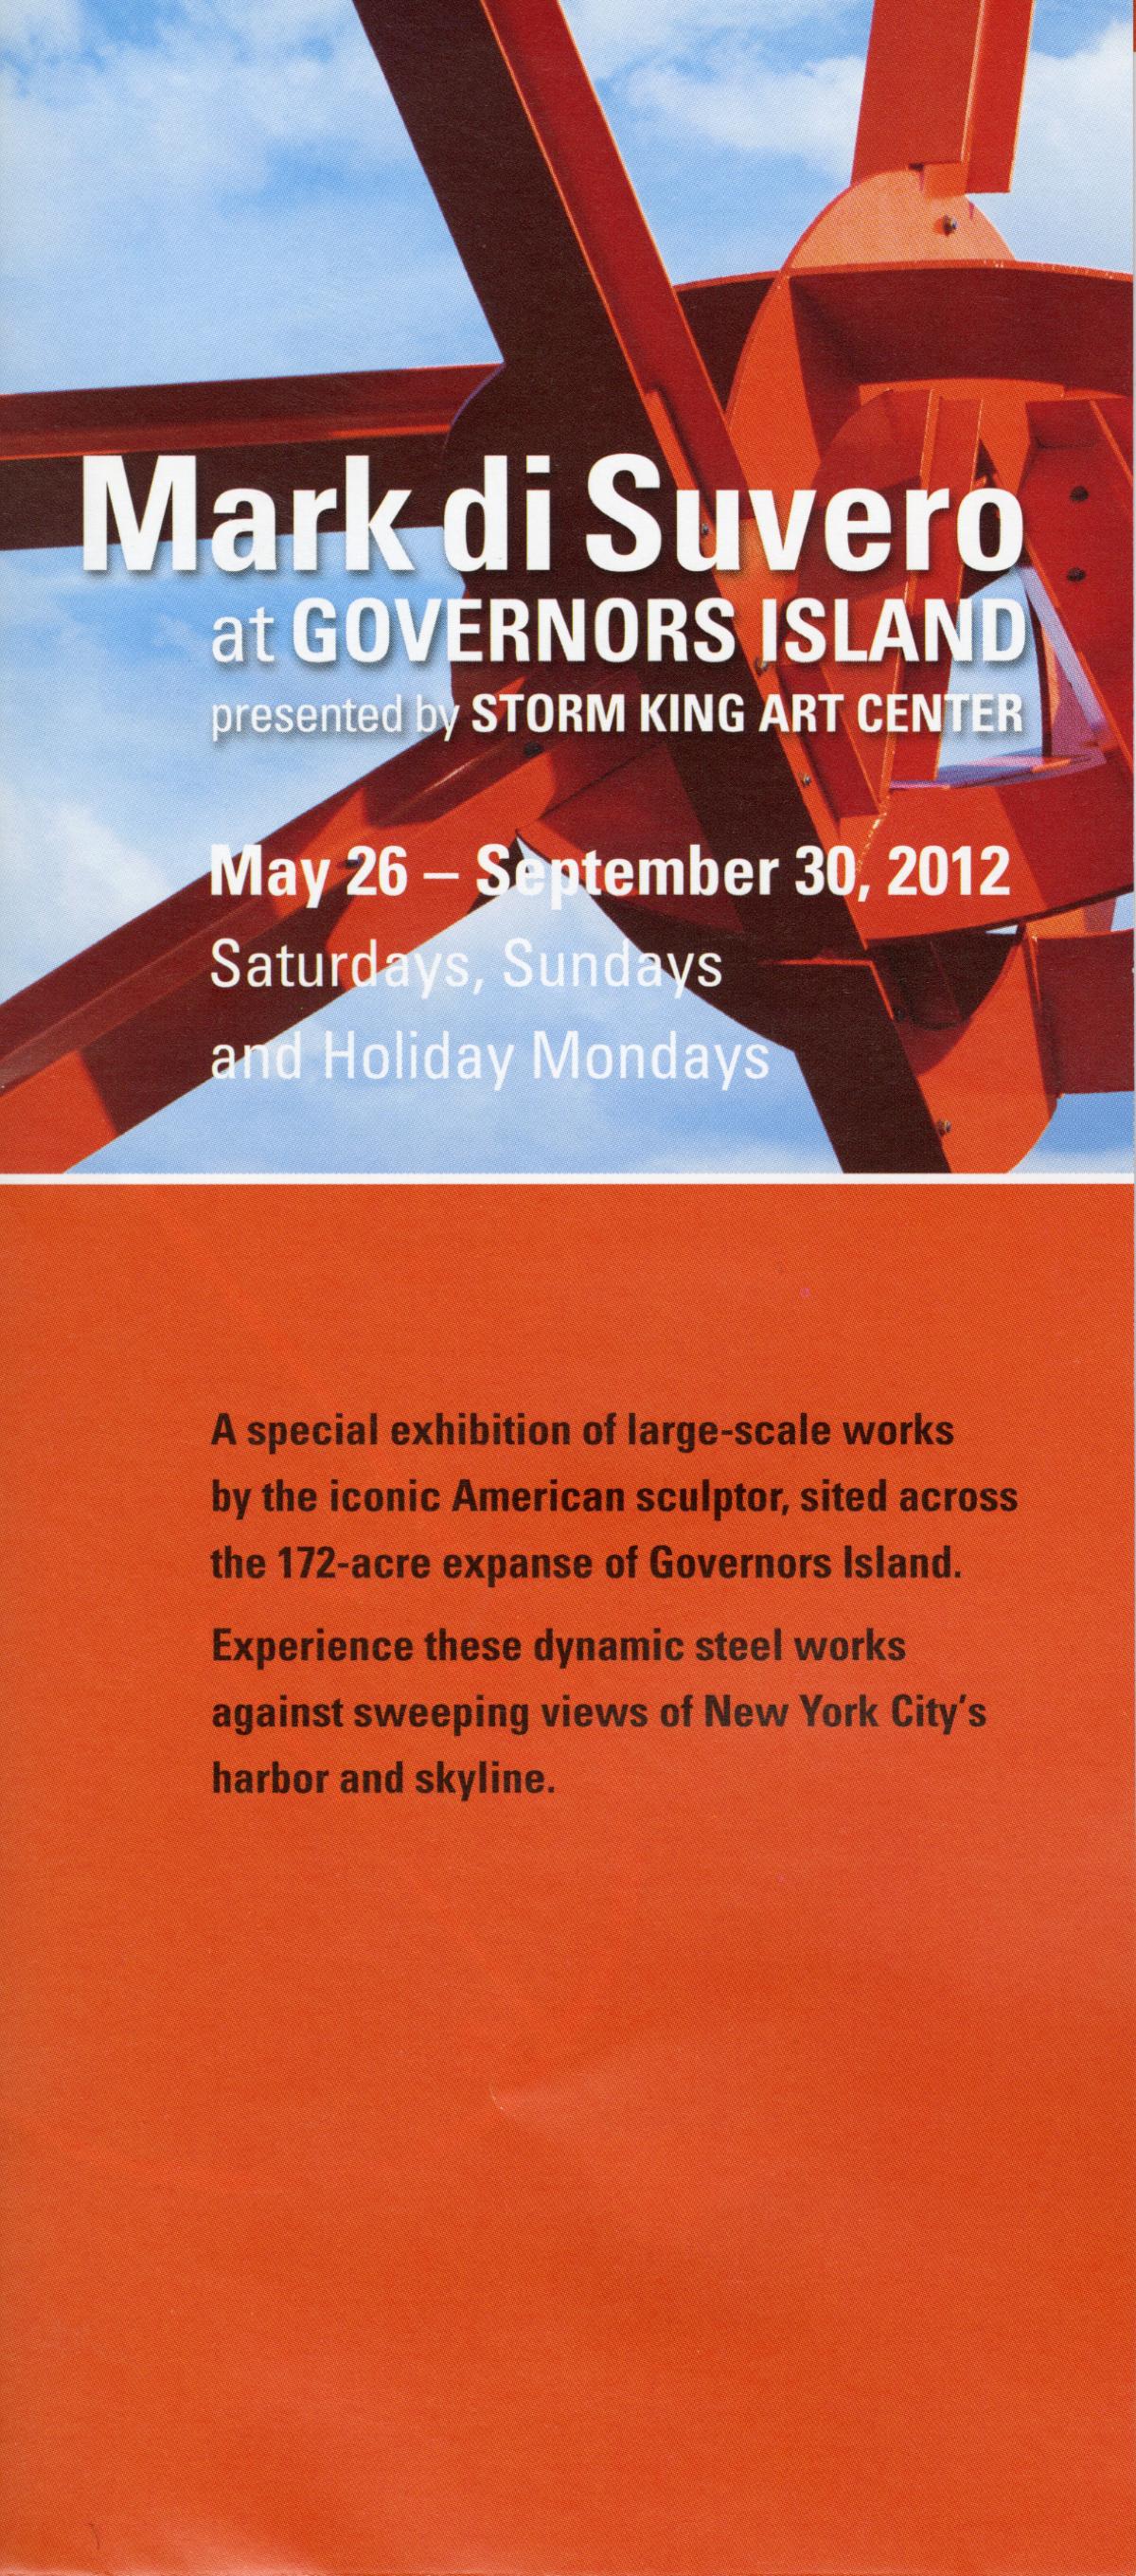 <em>Mark di Suvero at Governors Island</em> presented by Storm King Art Center, May 26 – September 30, 2012, exhibition catalogue cover